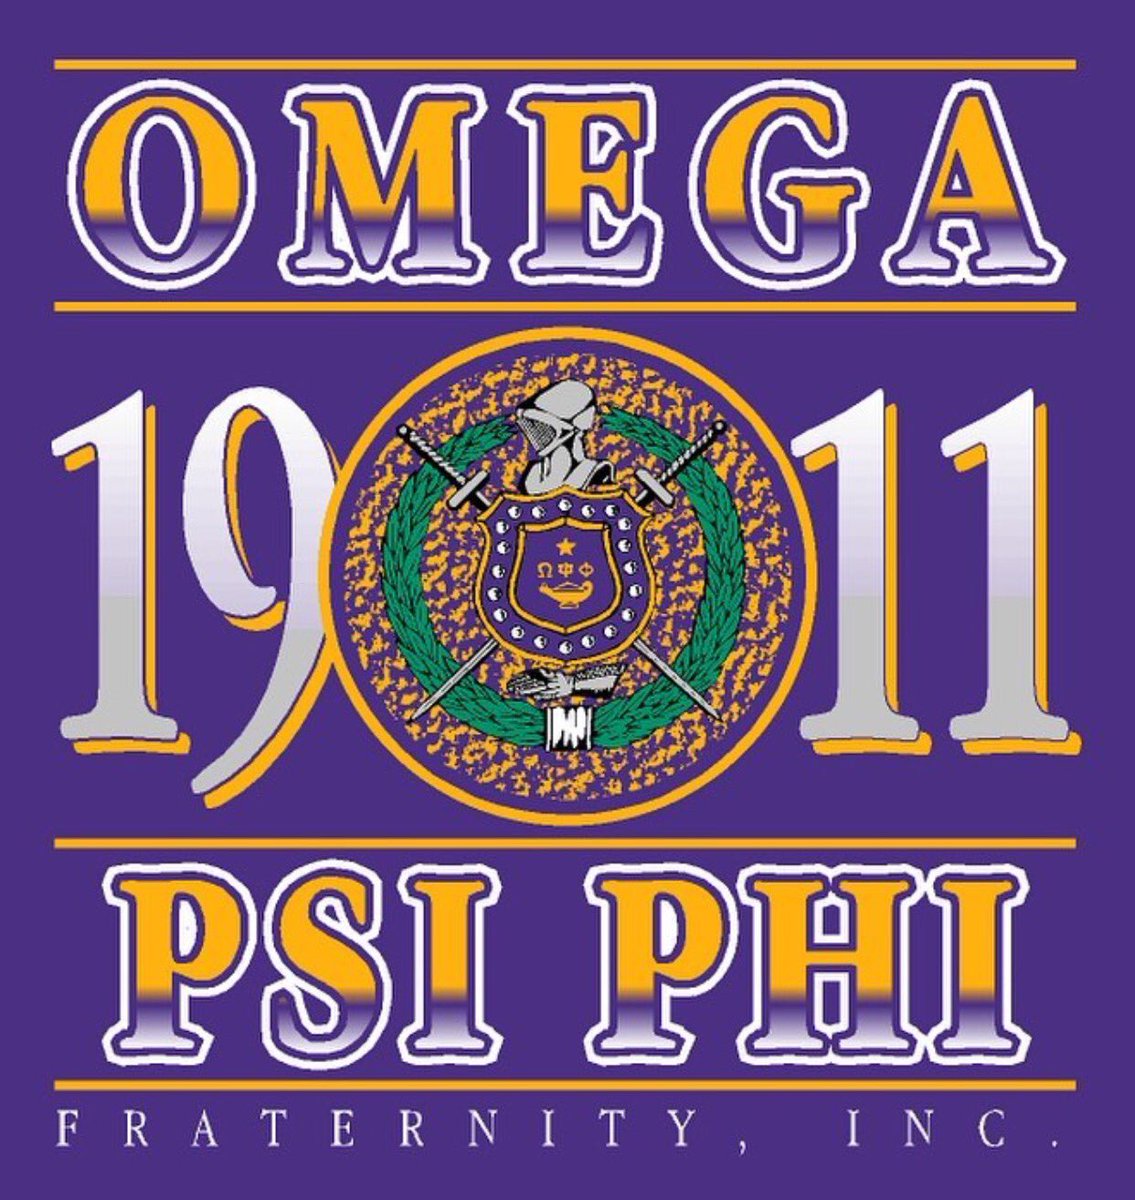 Thank you Xi Omicron Chapter of Omega Psi Phi Fraternity, Inc